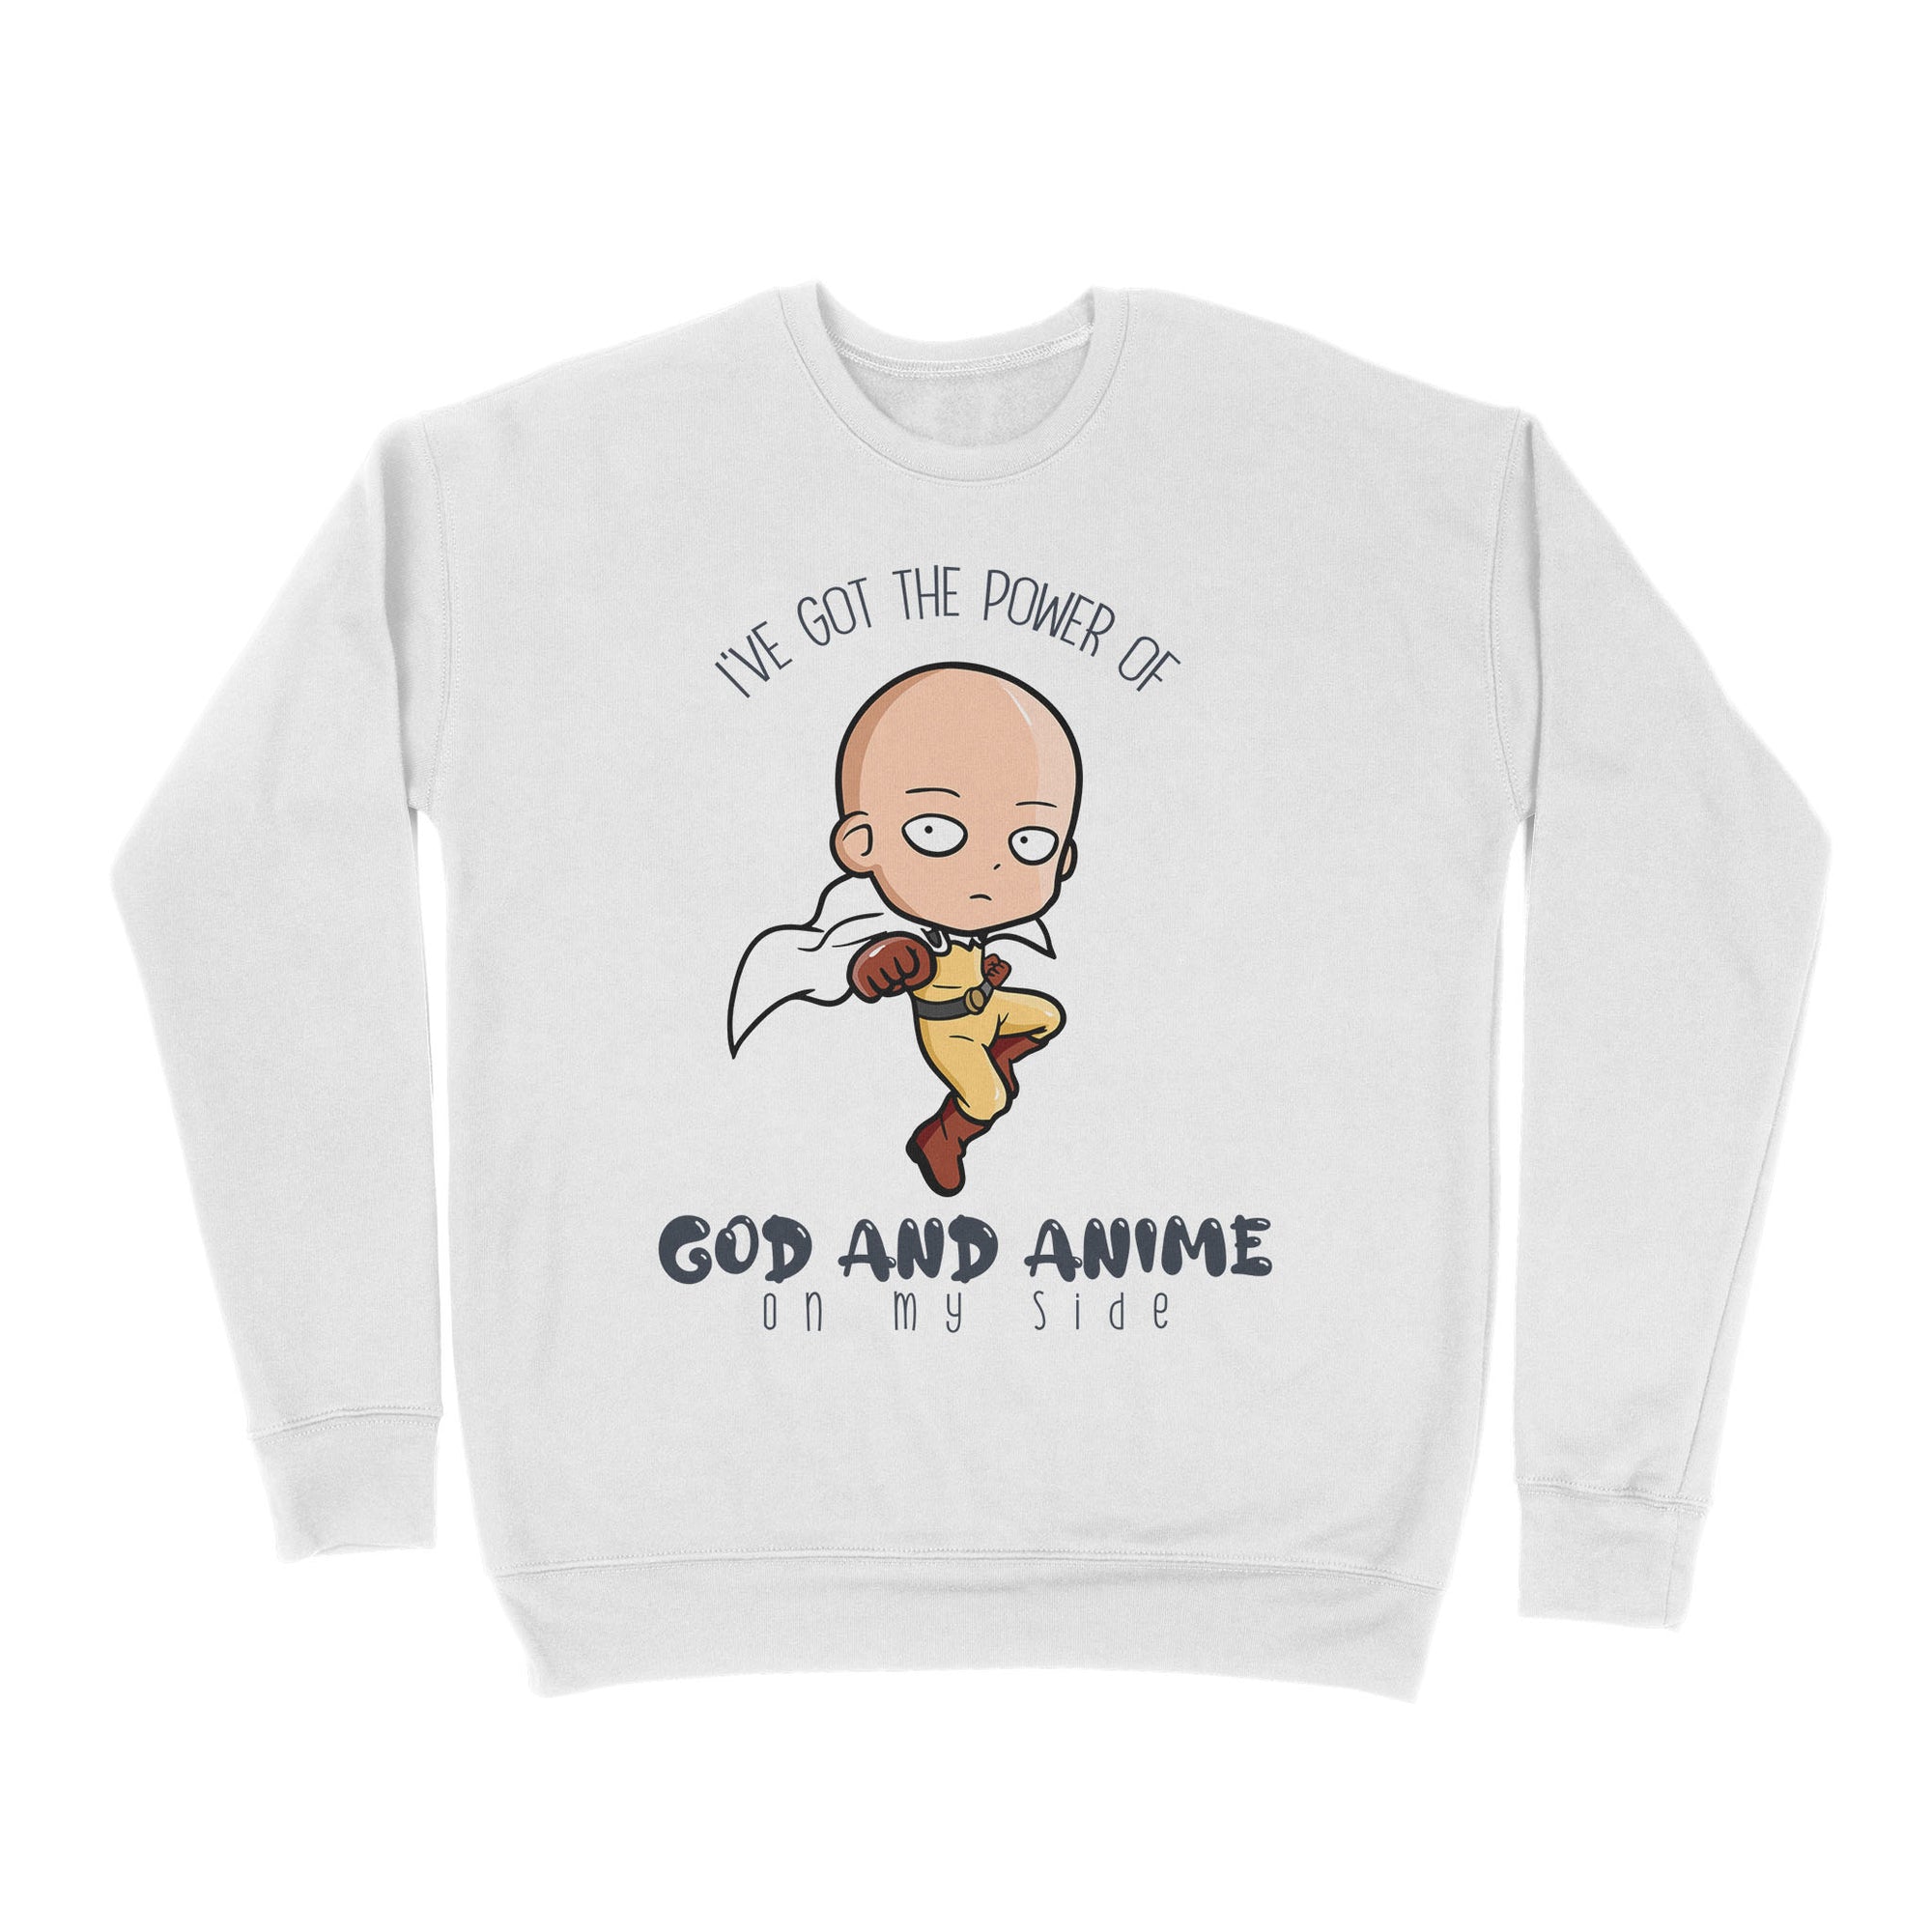 Premium Crew Neck Sweatshirt - I Have The Power Of God And Anime On My Side